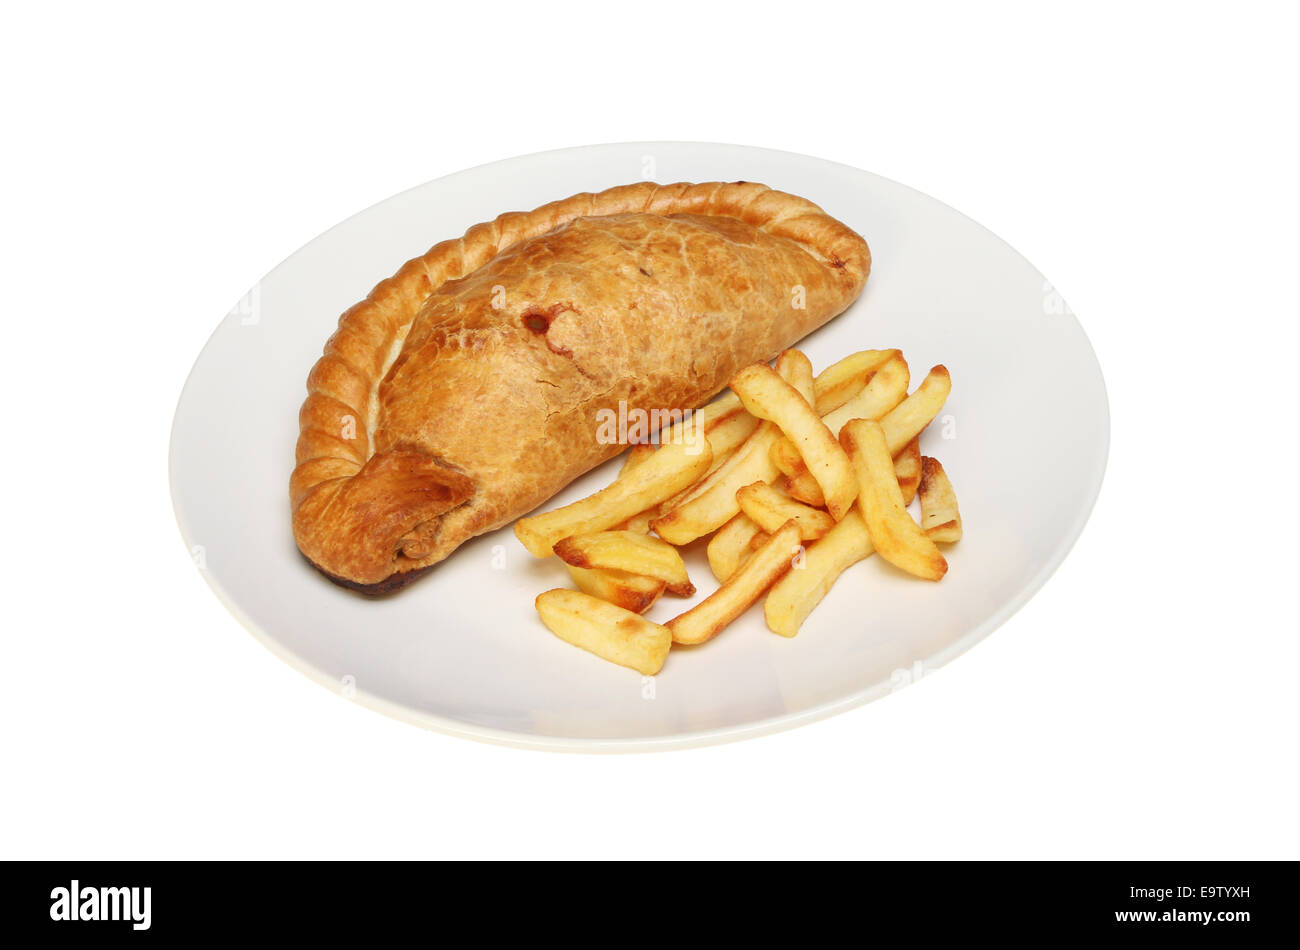 Cornish pasty and chips on a plate isolated against white Stock Photo